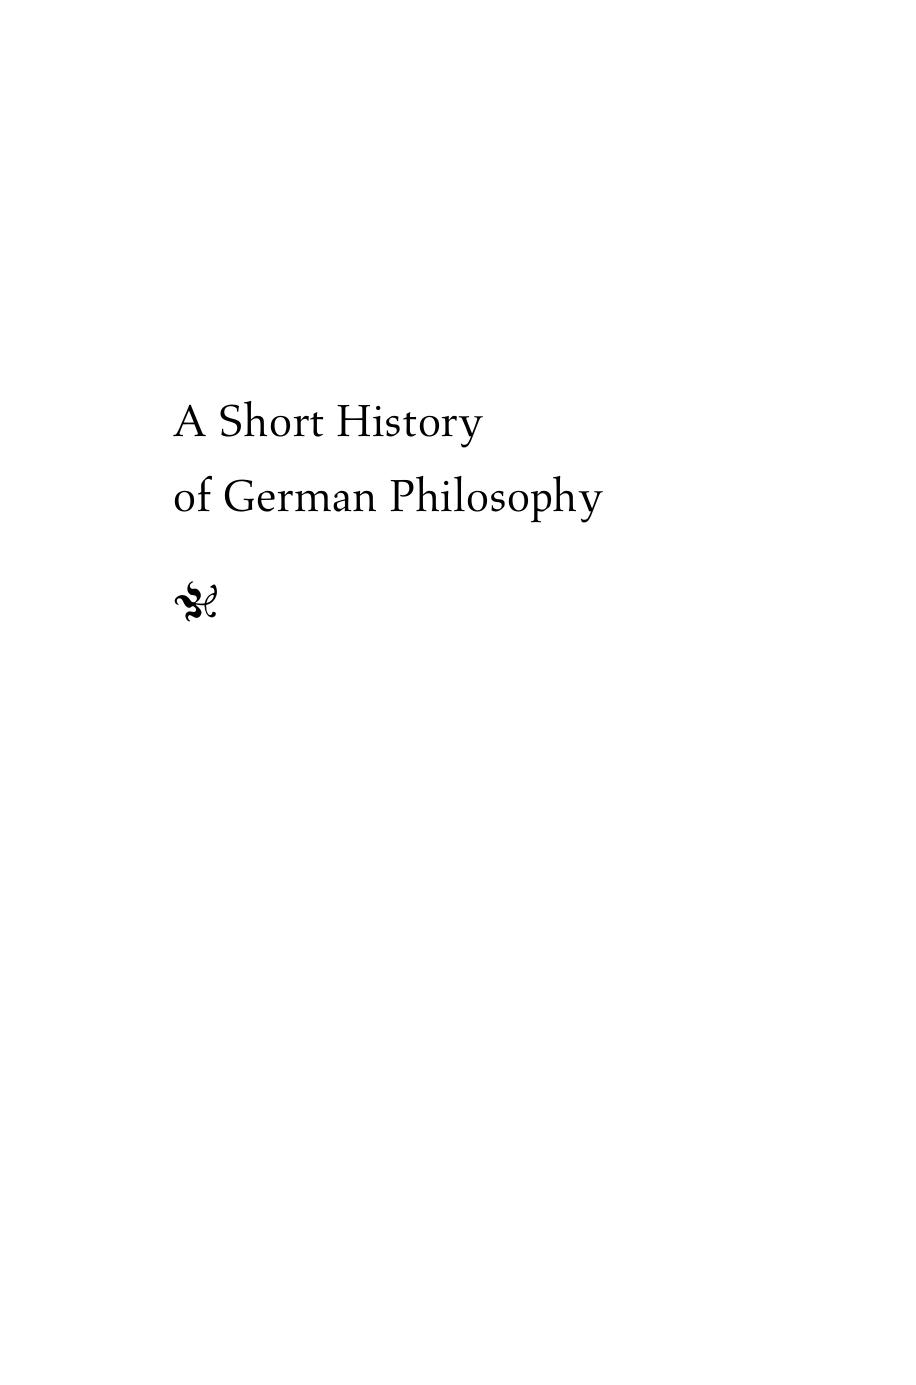 A short history of German philosophy / Vittorio Hösle ; Translated by Steven Rendall.